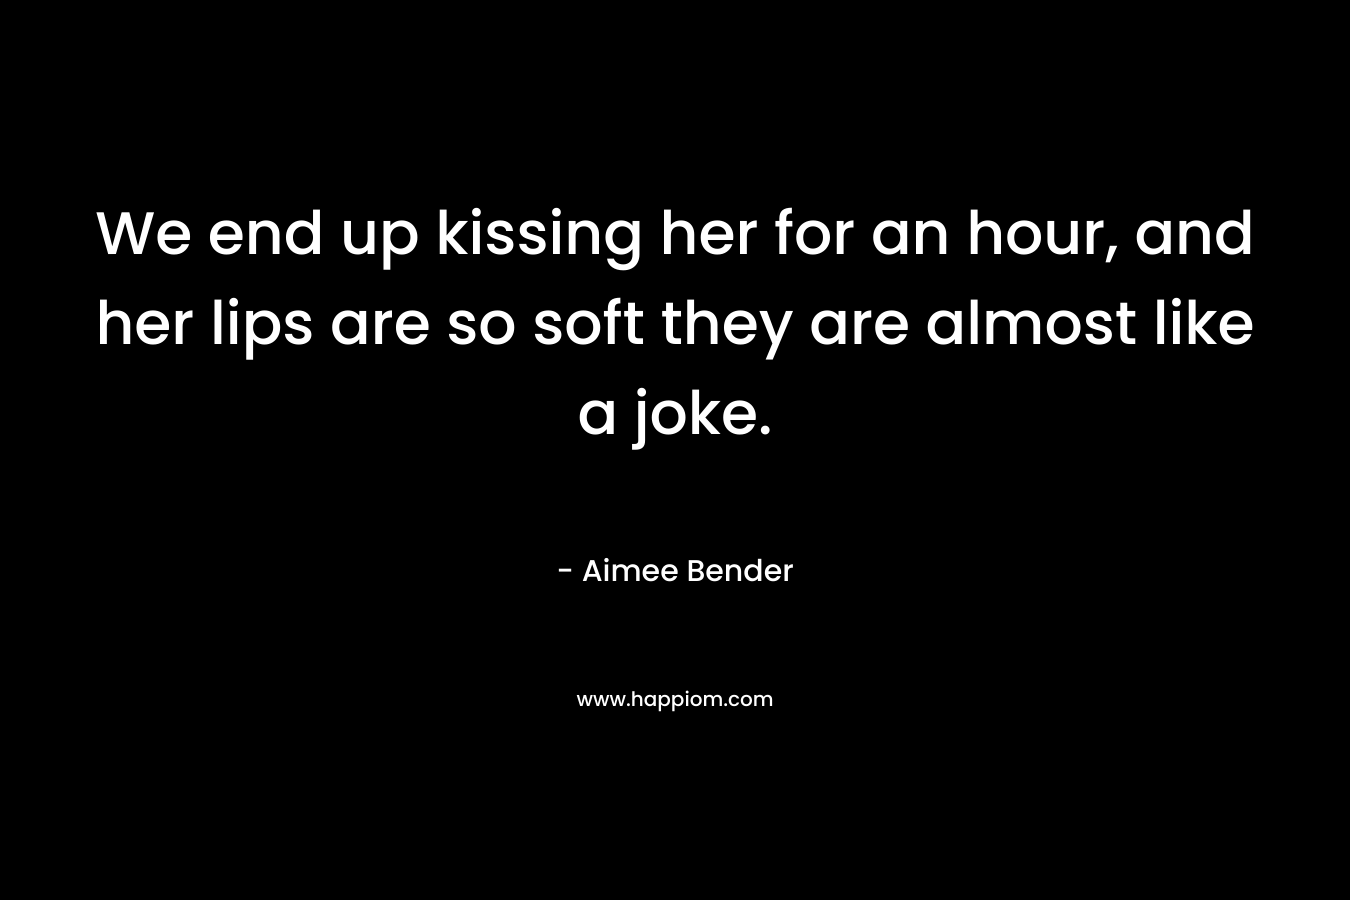 We end up kissing her for an hour, and her lips are so soft they are almost like a joke. – Aimee Bender